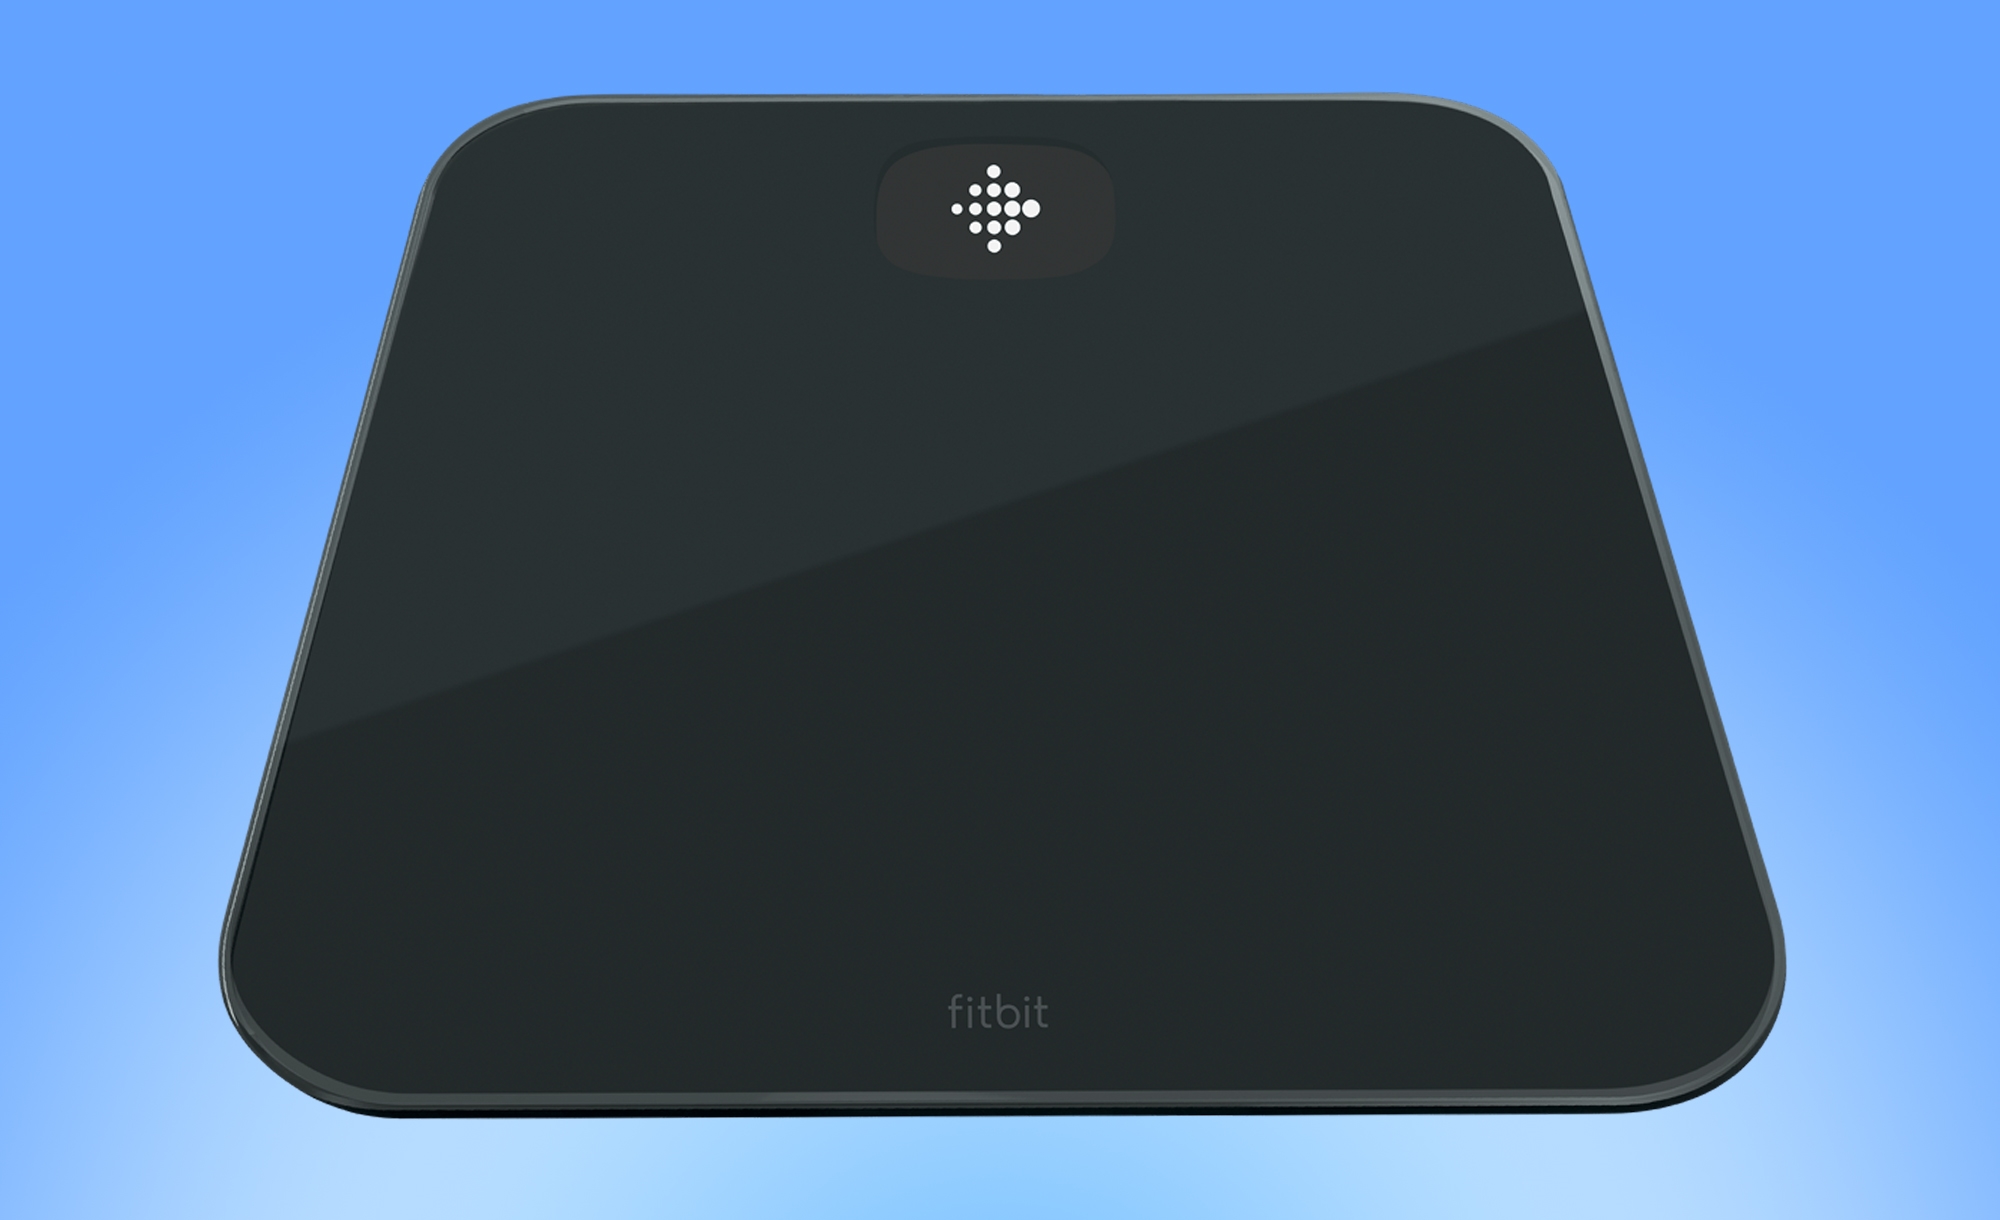 Fitbit Aria Air smart scale | DeviceDaily.com